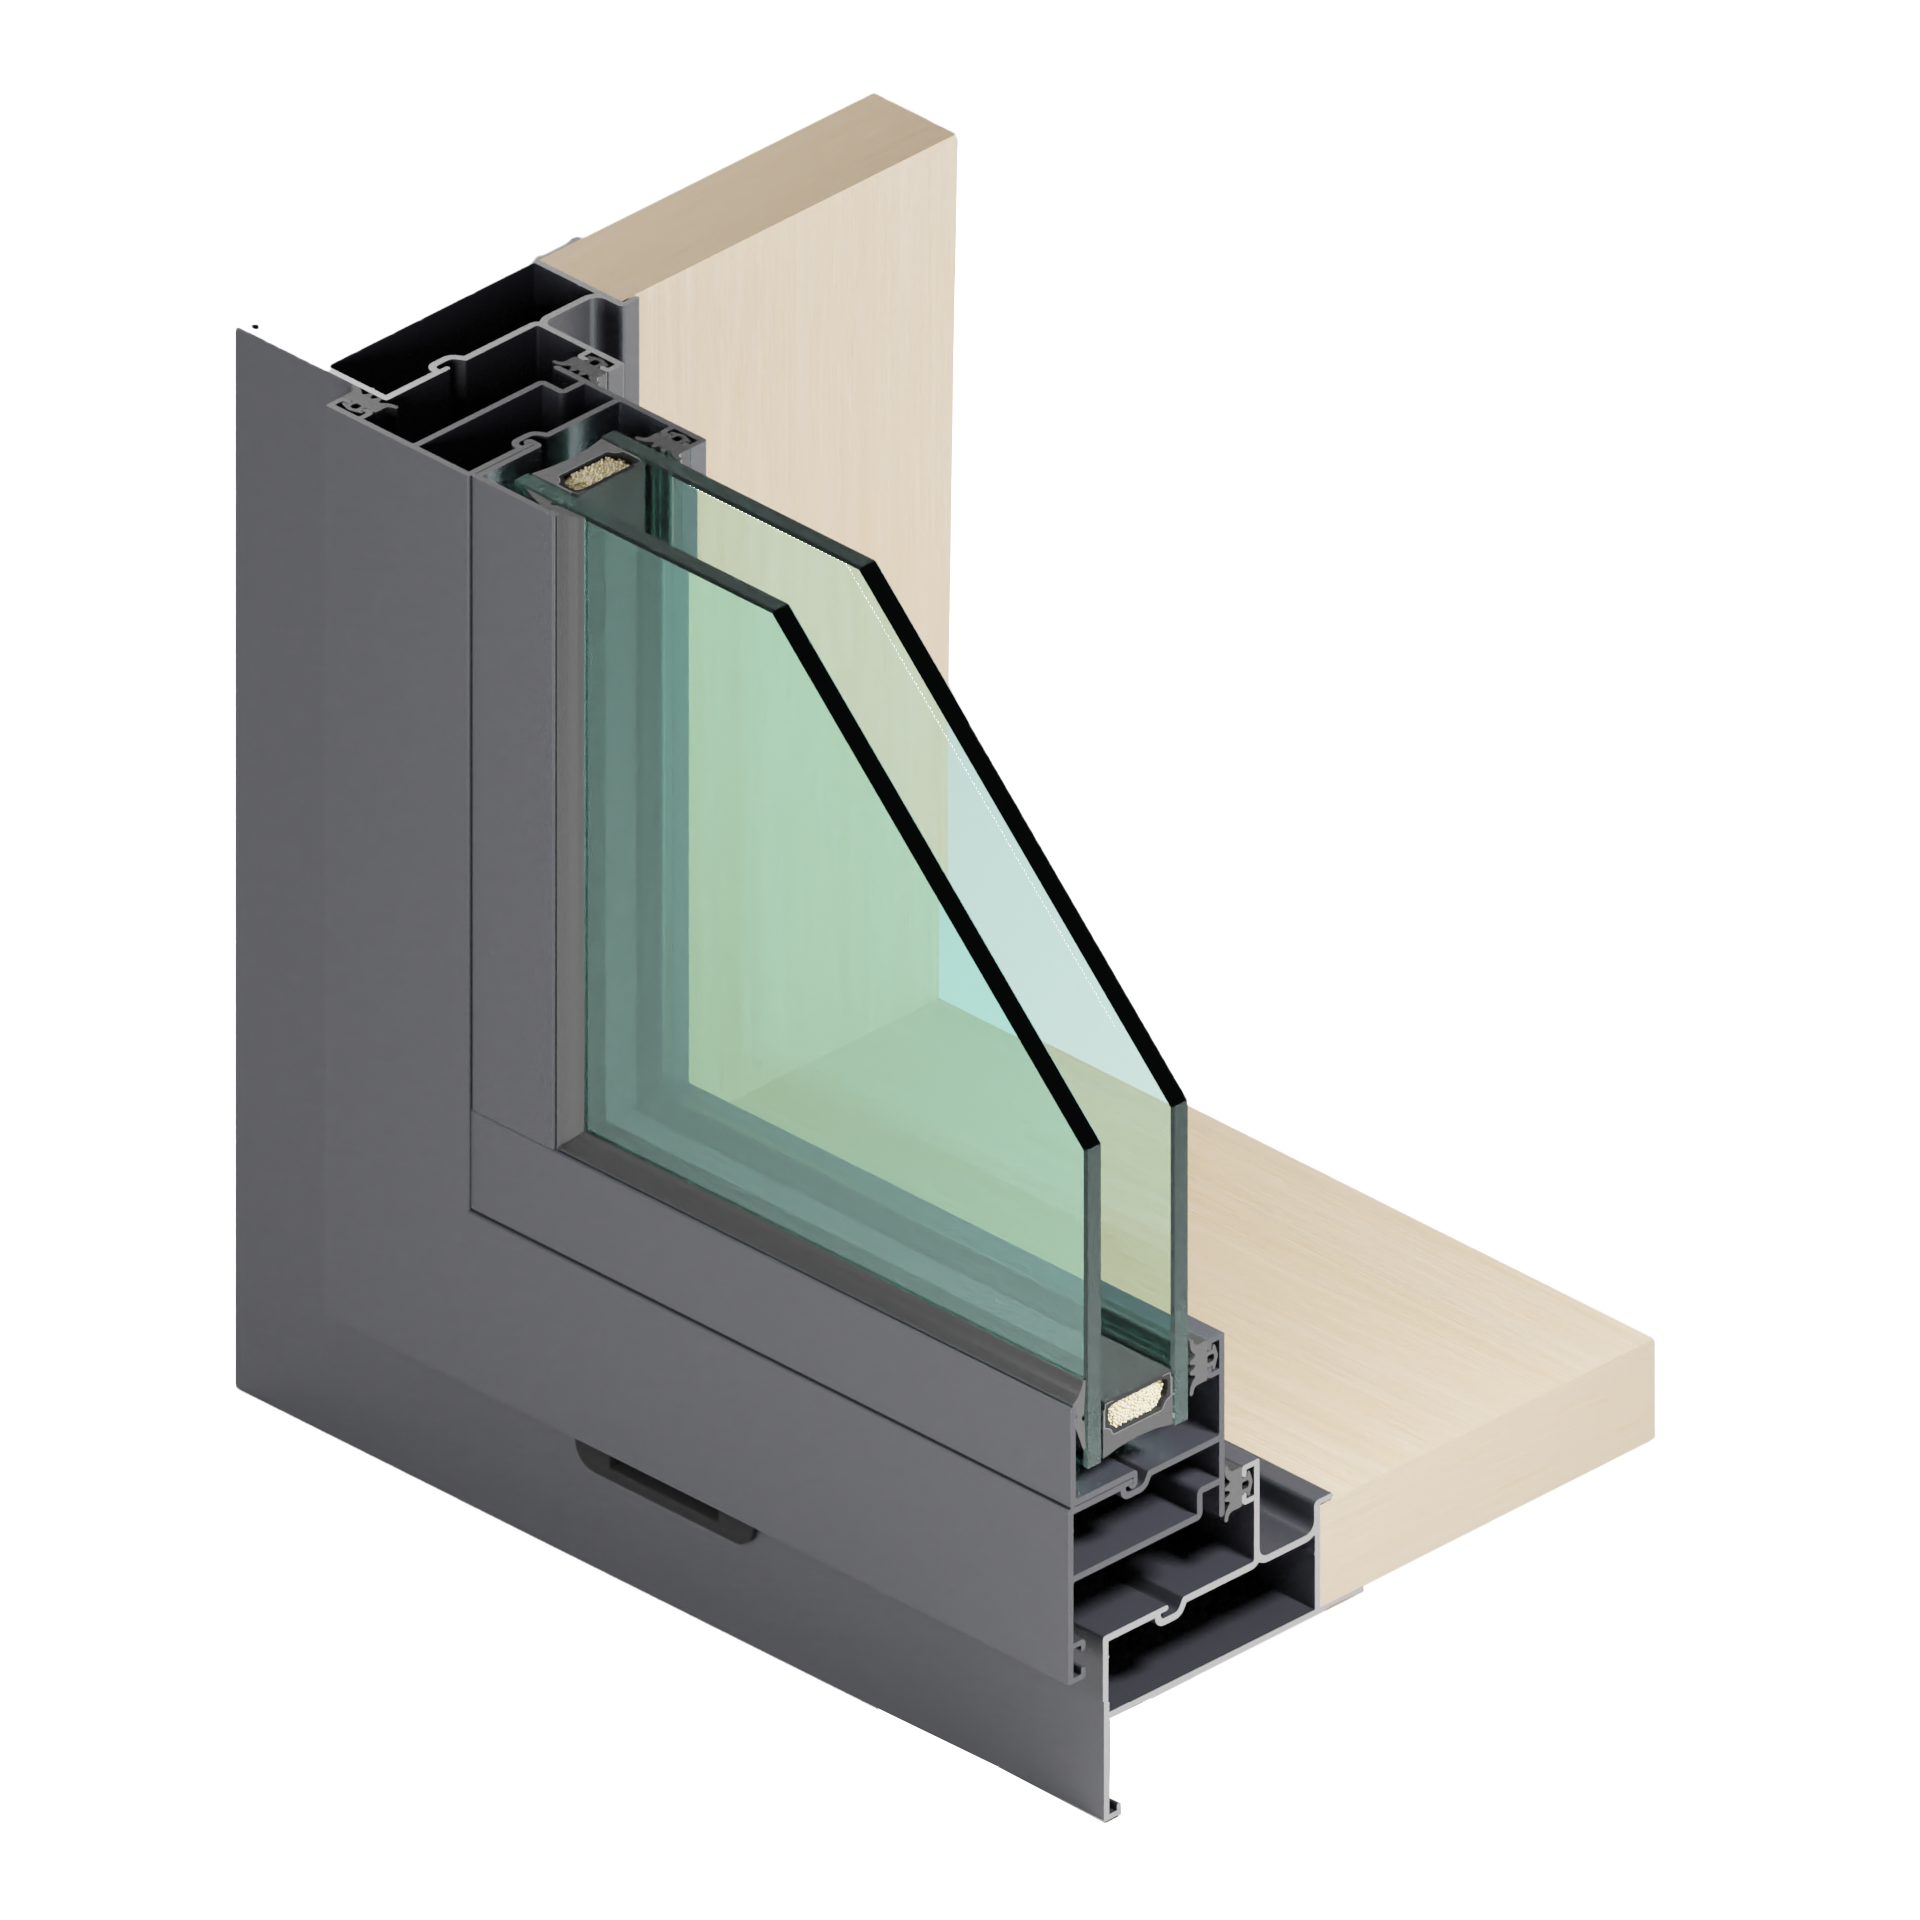 NT36 - Hollow Frame AW DG with Timber Liner at Sill and Jamb